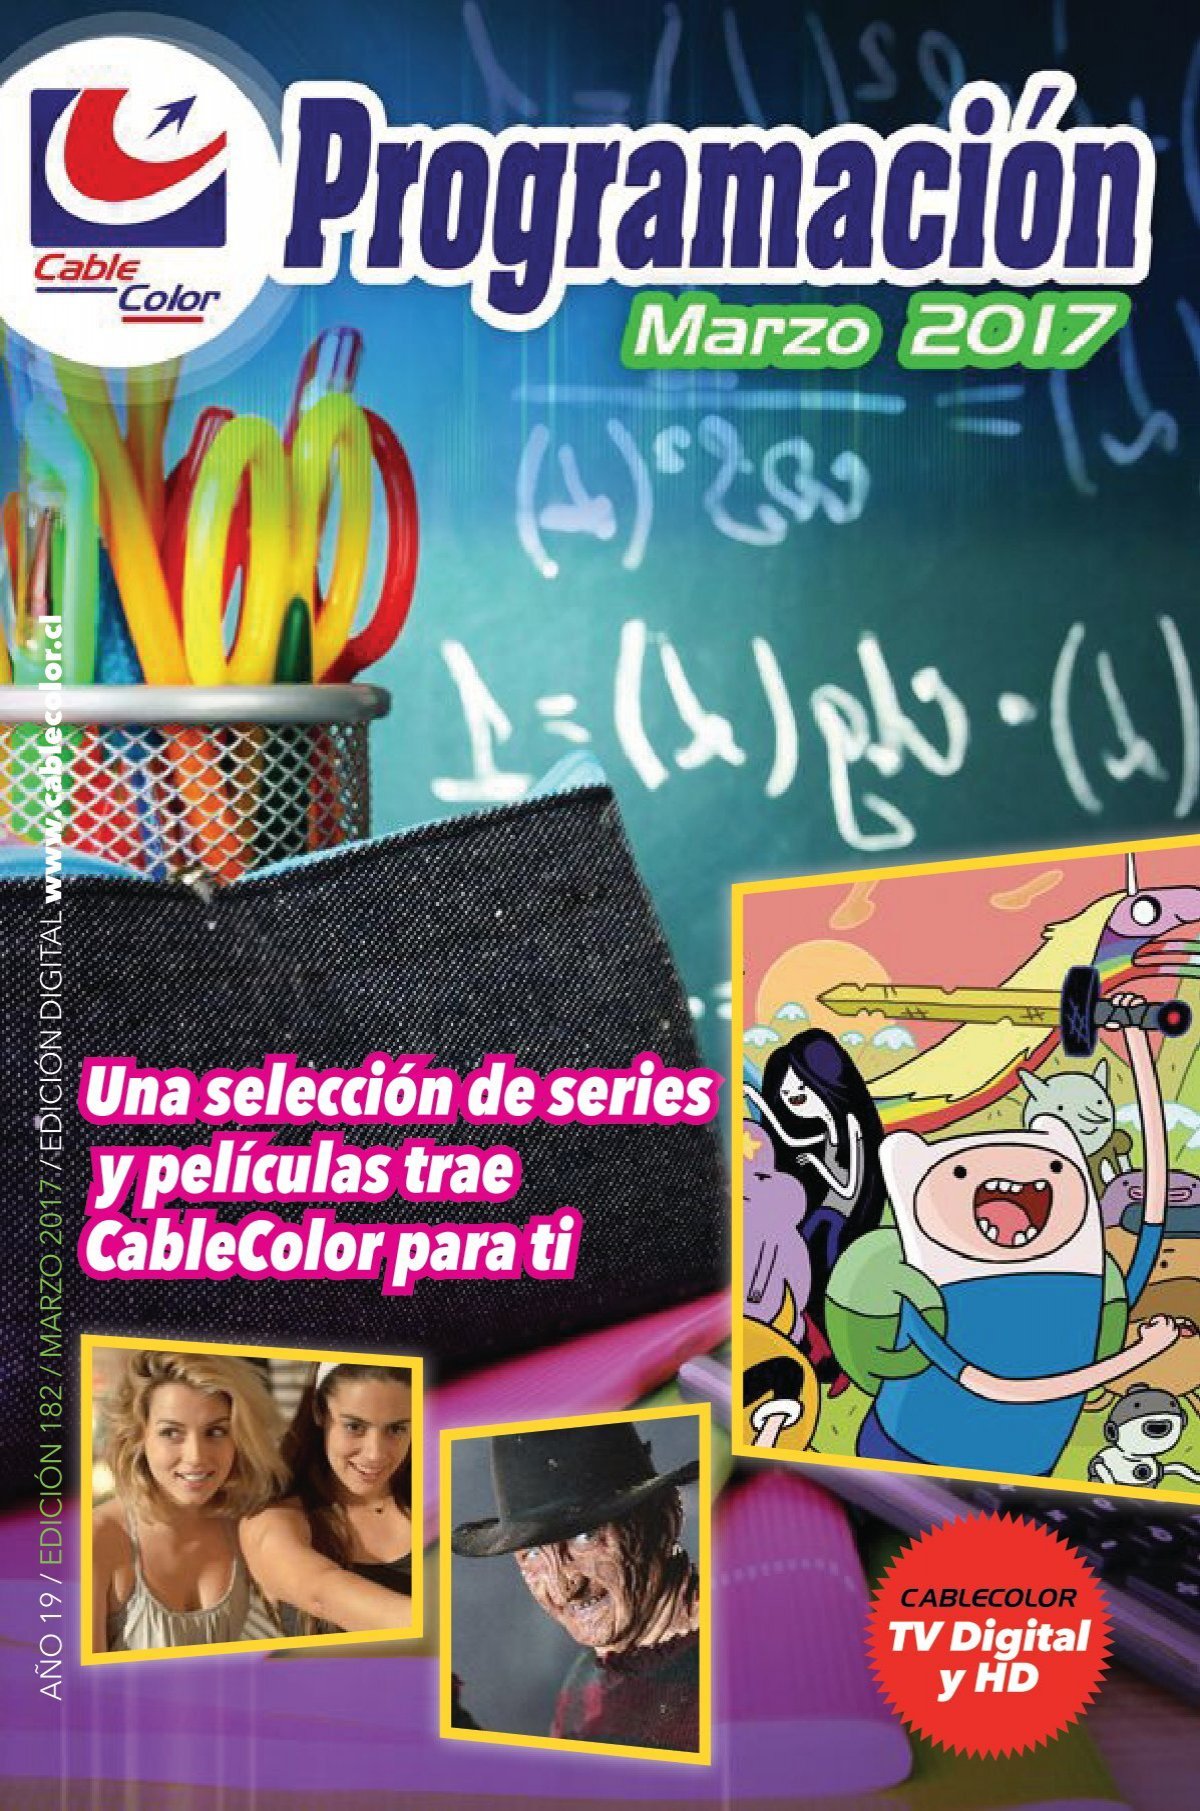 Cablemarzo 2017